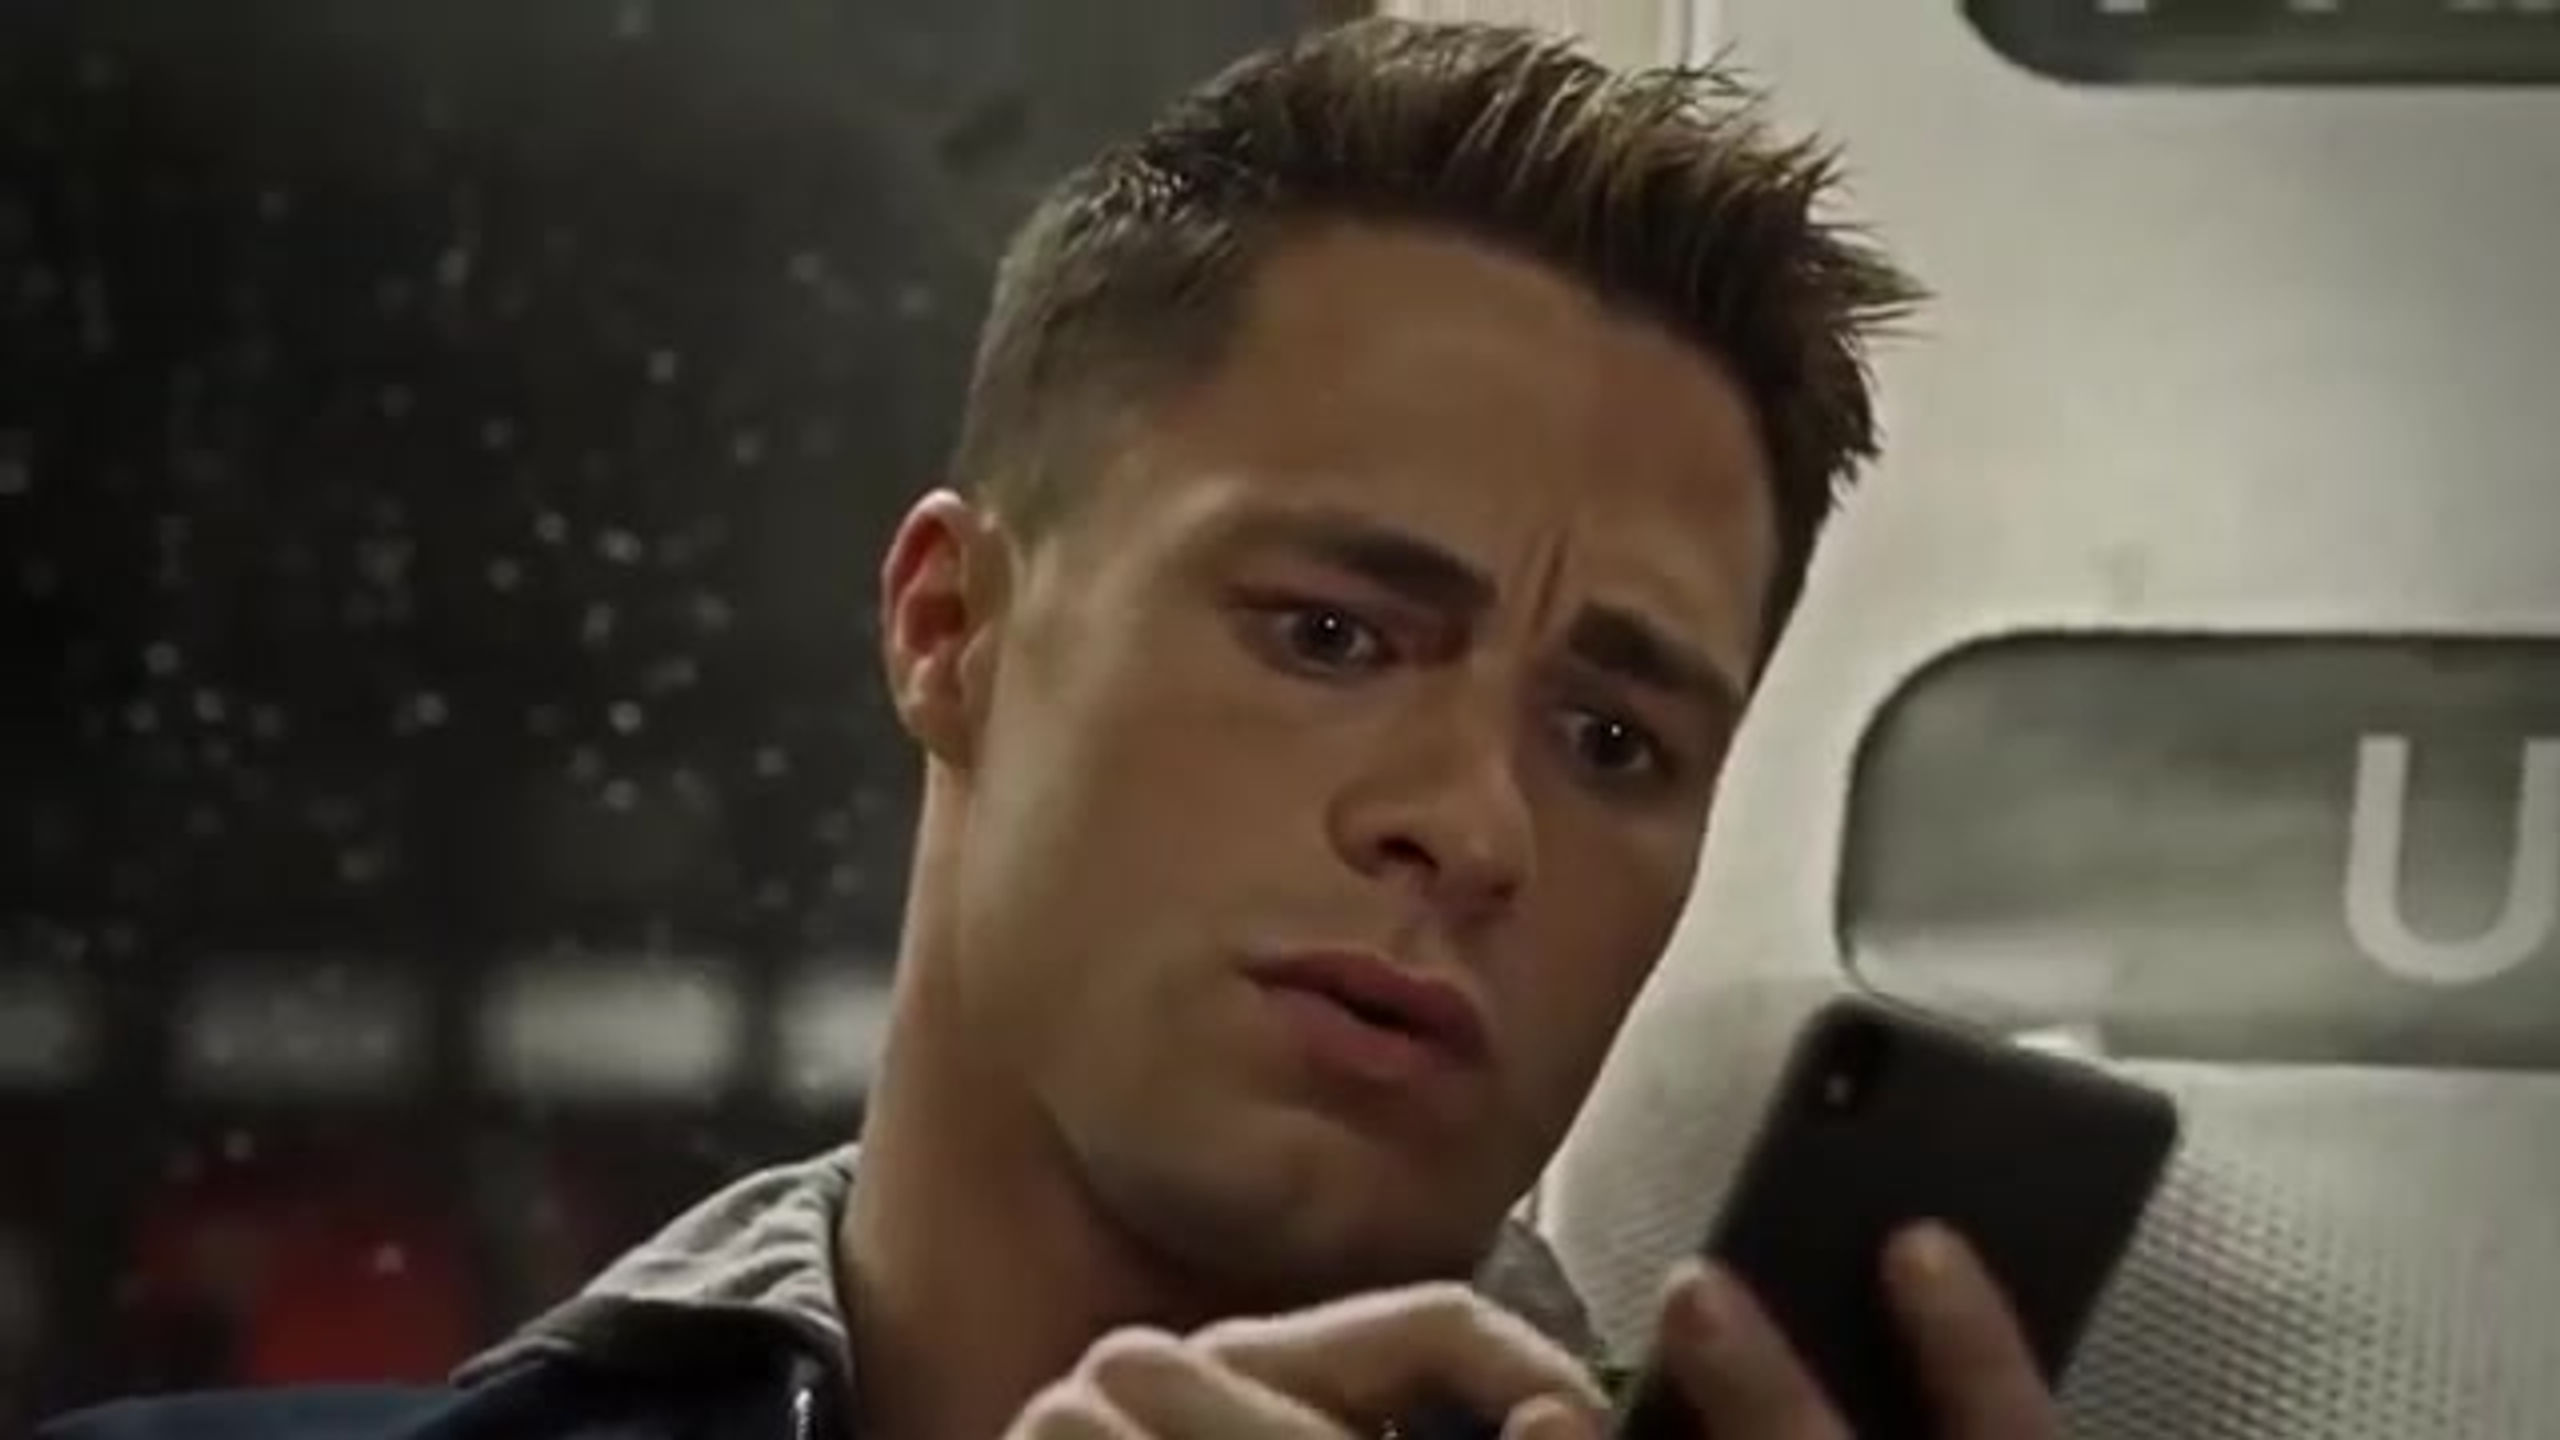 Puzzles & Dragons Commercial Starring Colton Haynes